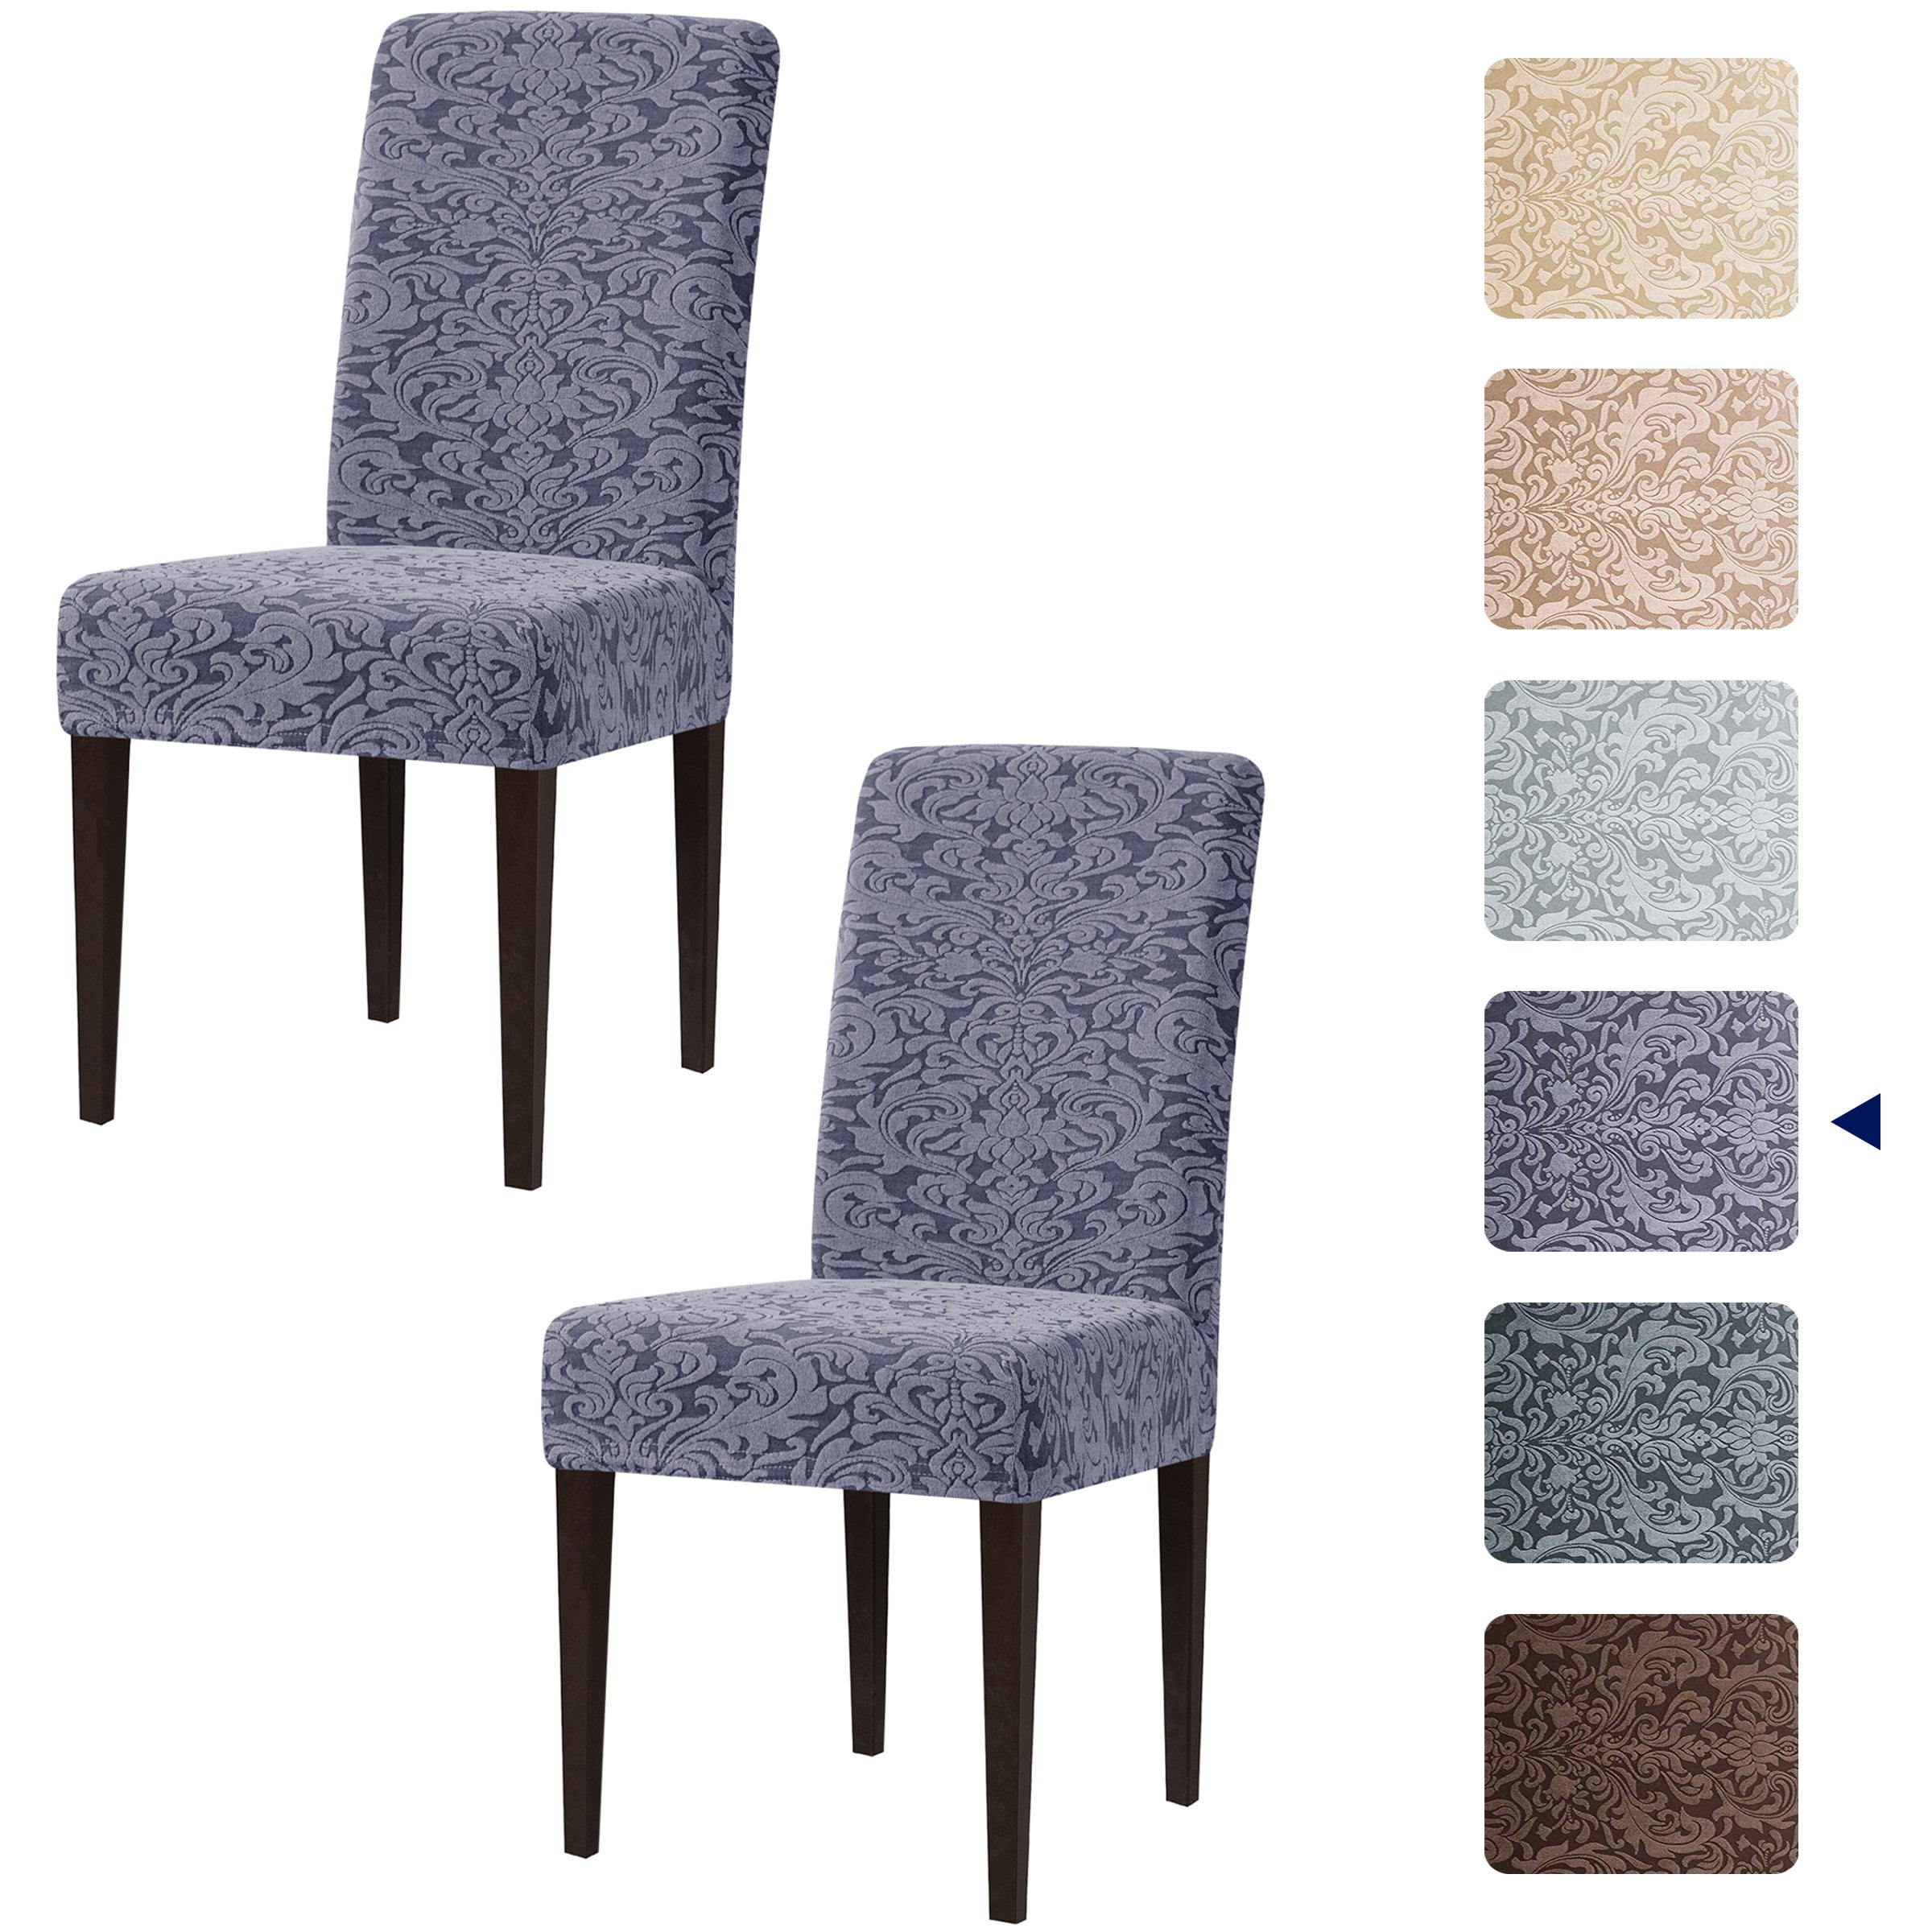 Subrtex Stretch Jacquard Damask Dining Chair Slipcover (Set of 2, Gray)